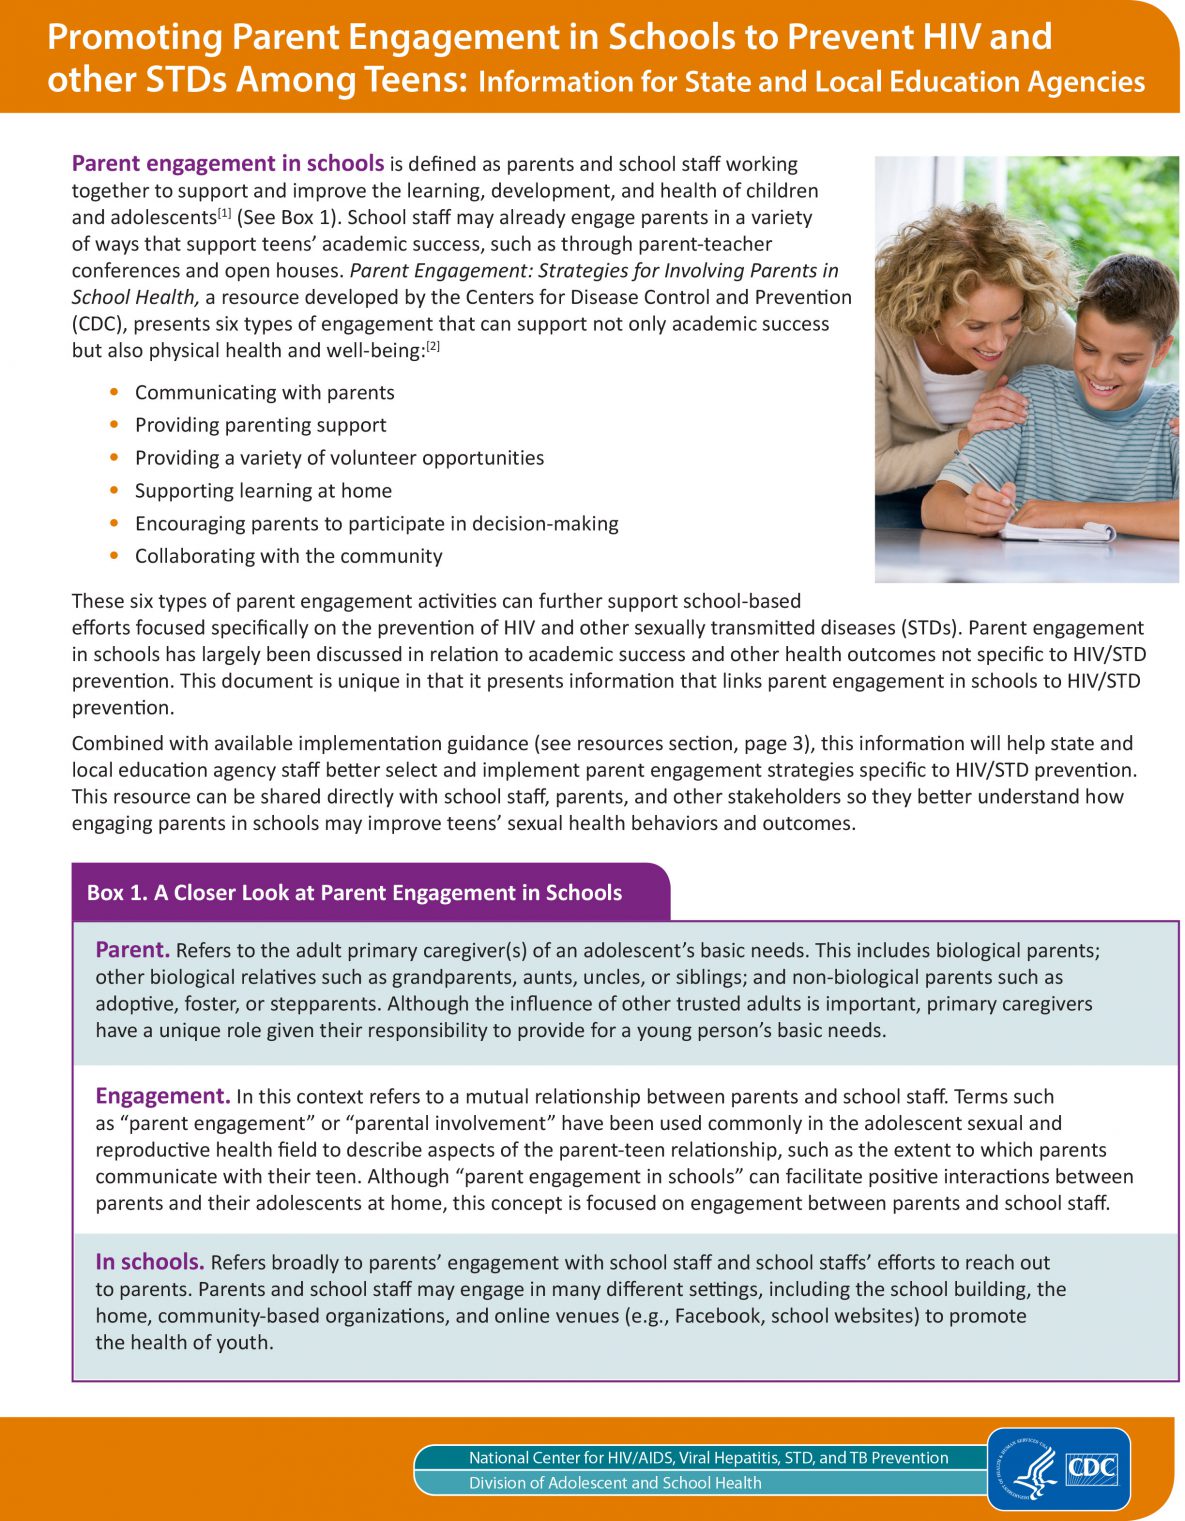 Promoting Parent Engagement in Schools to Prevent HIV and other STDs Among Teens: Information for State and Local Education Agencies